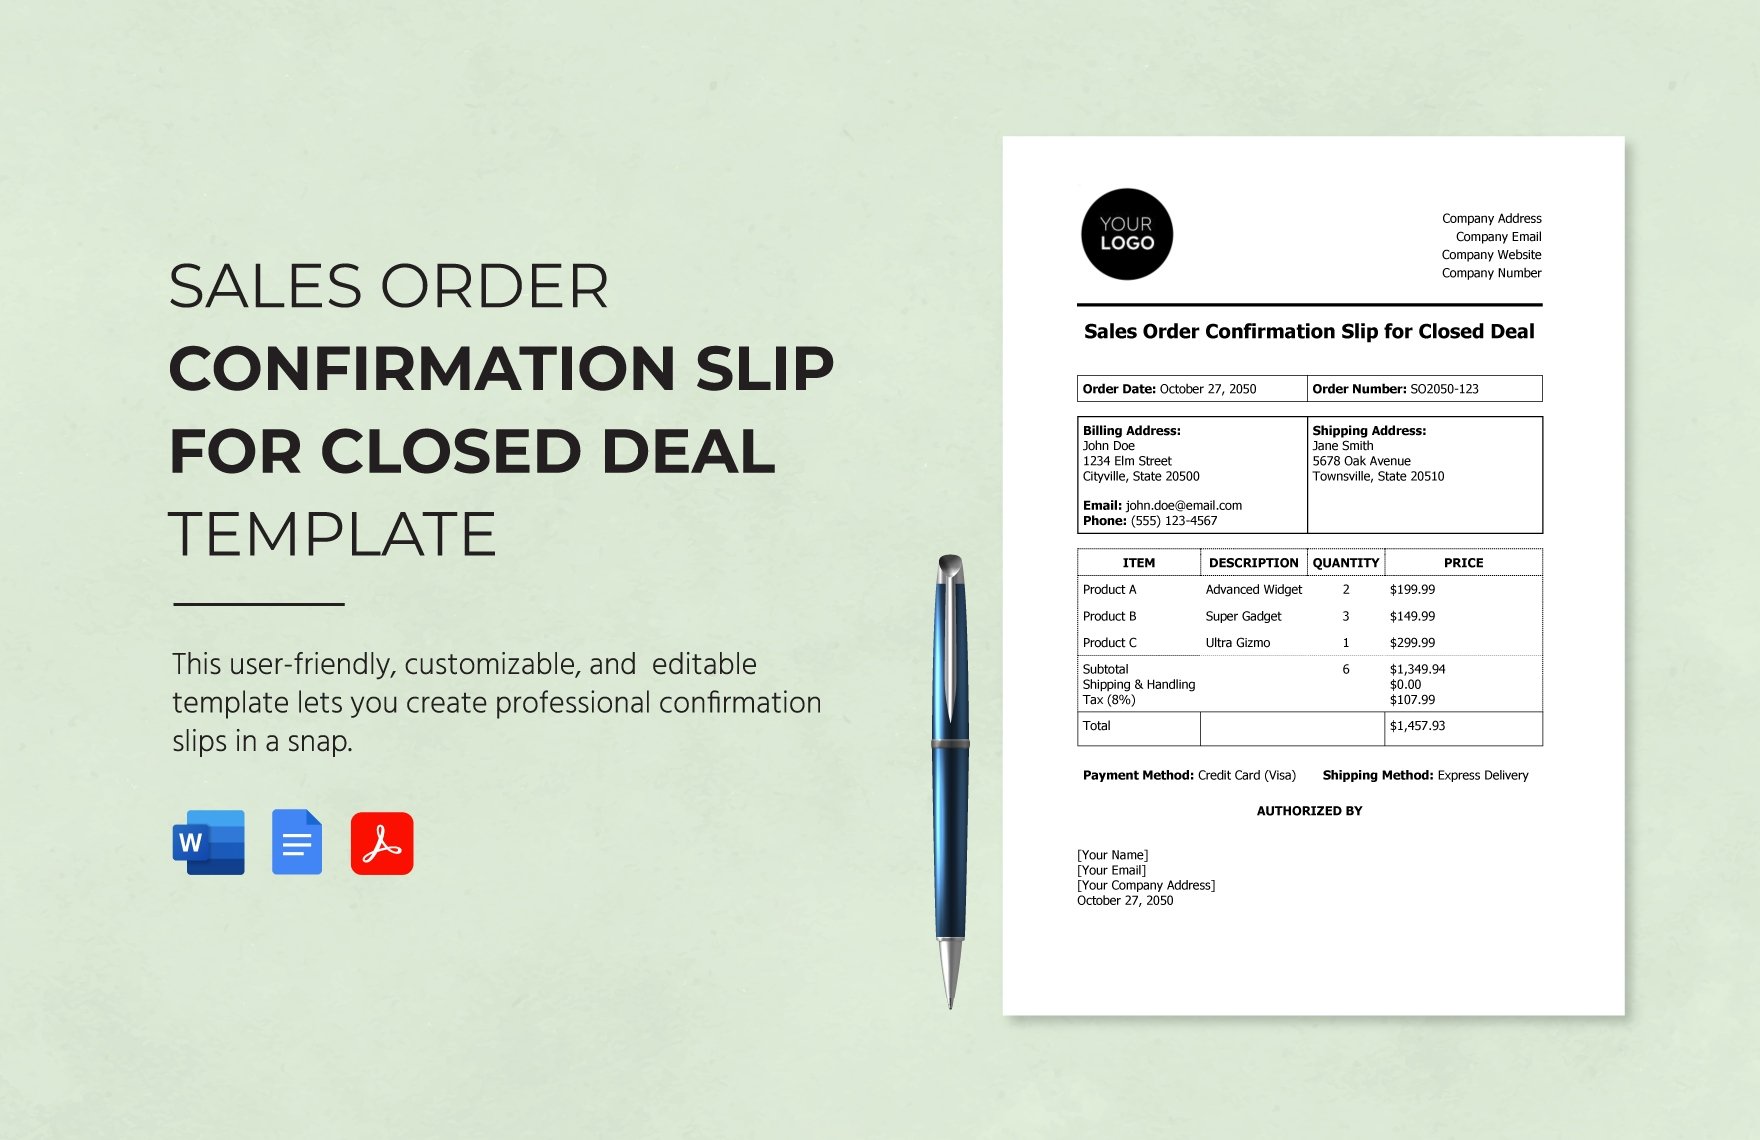 Sales Order Confirmation Slip for Closed Deal Template